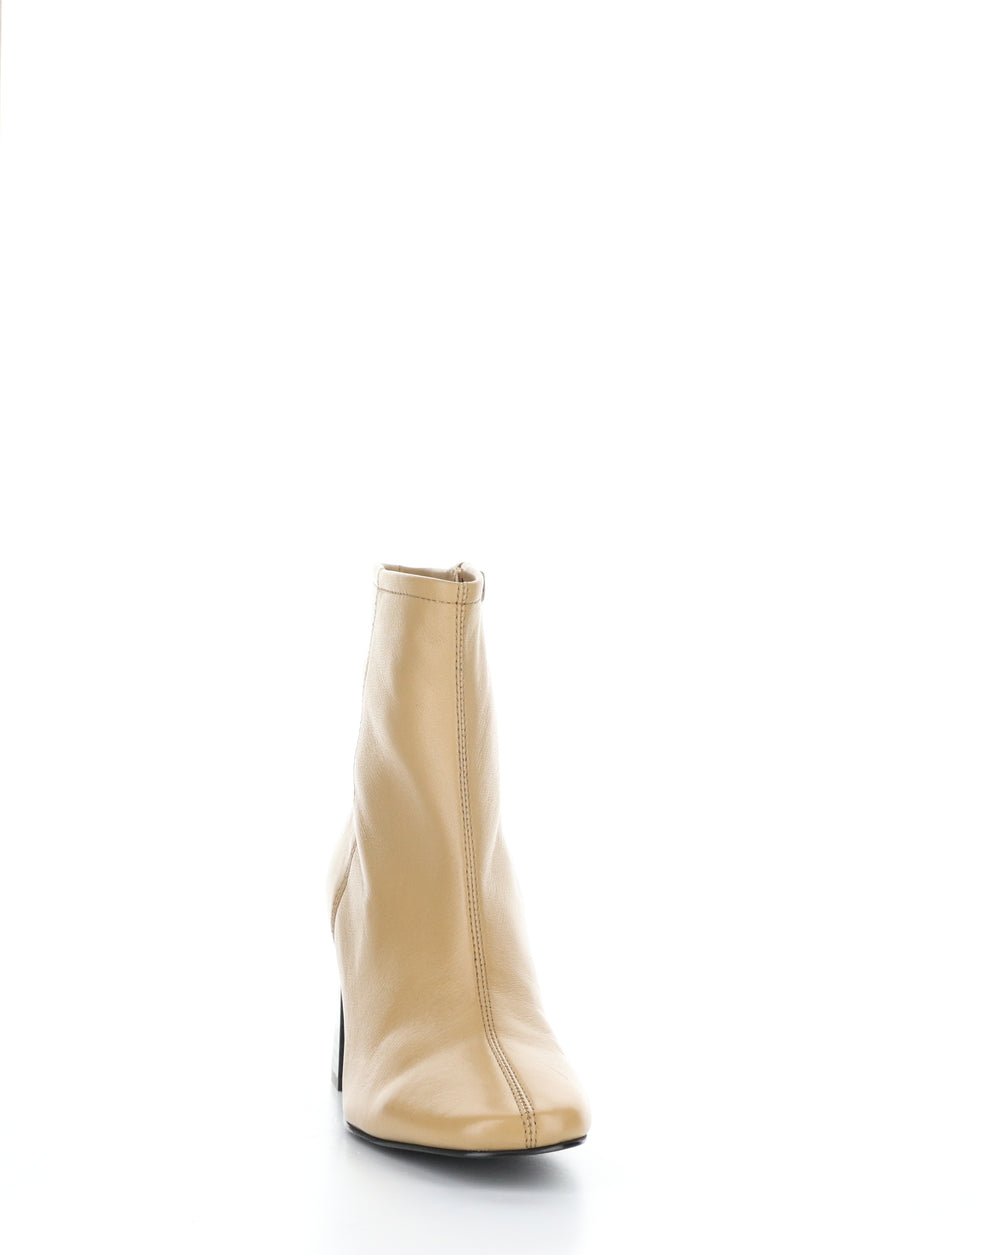 TAGUS CAMEL Pointed Toe Boots